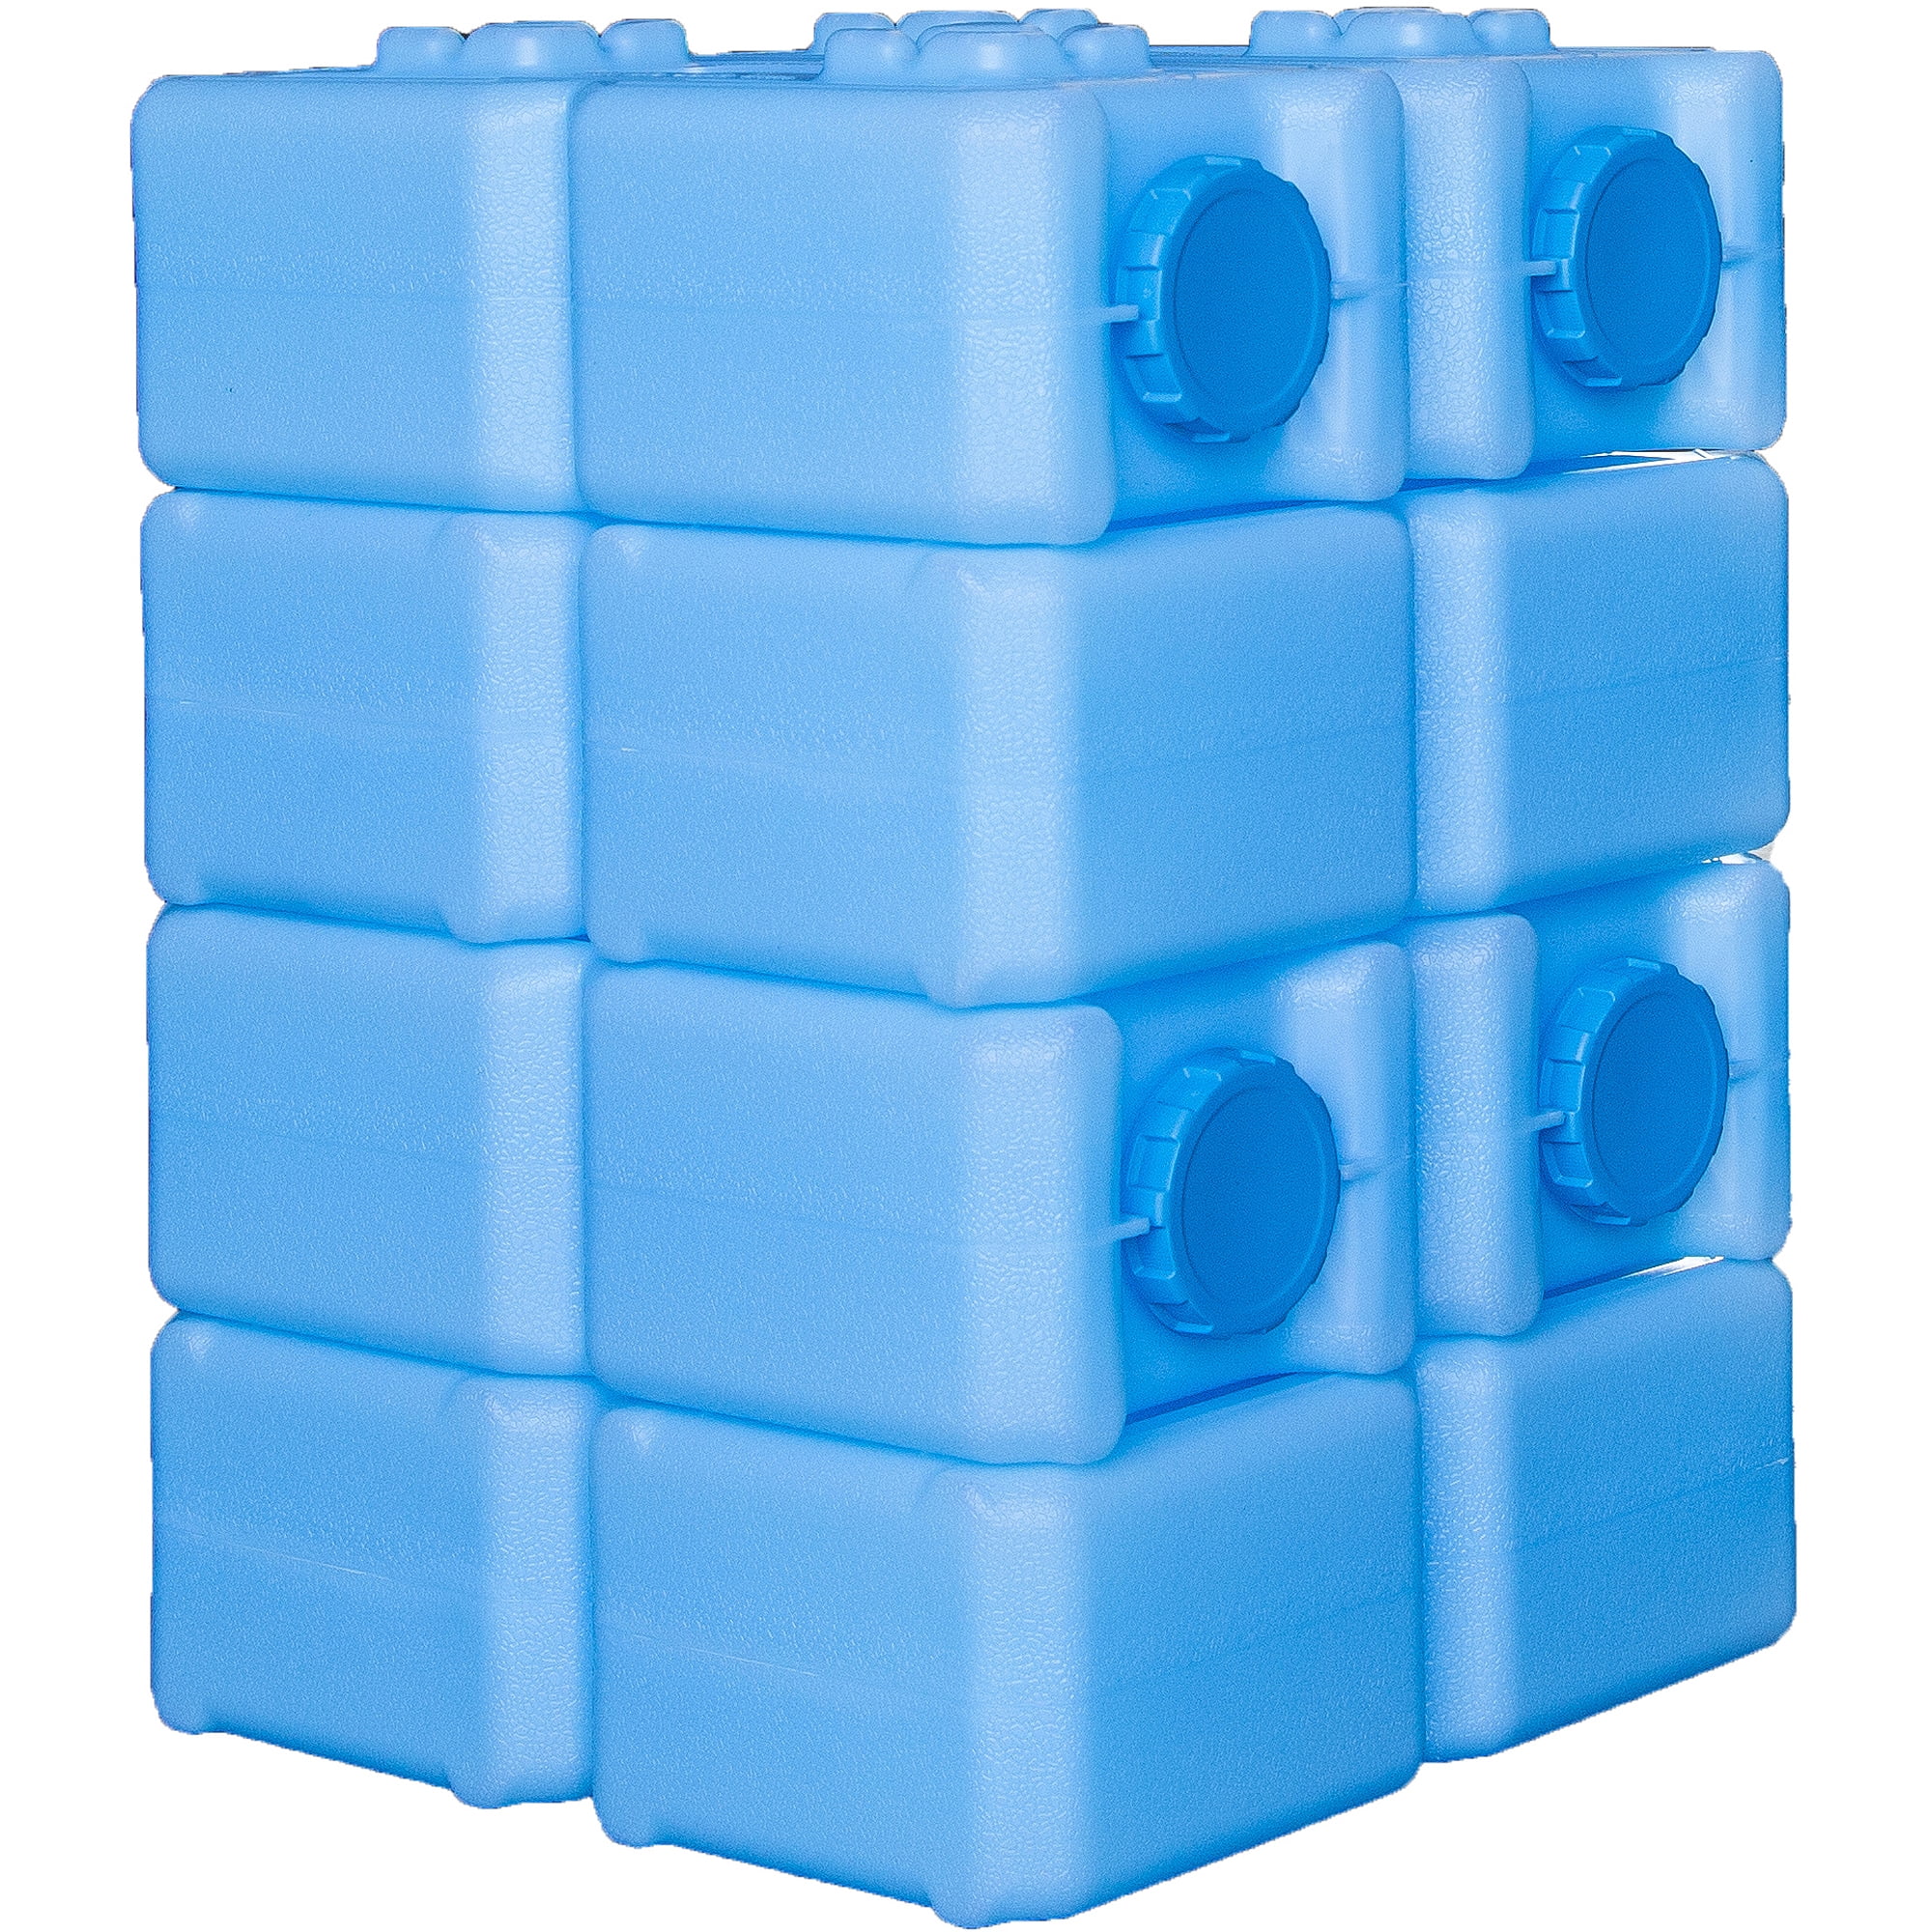 WaterBrick 14 Gallon Stackable Water Container Kit